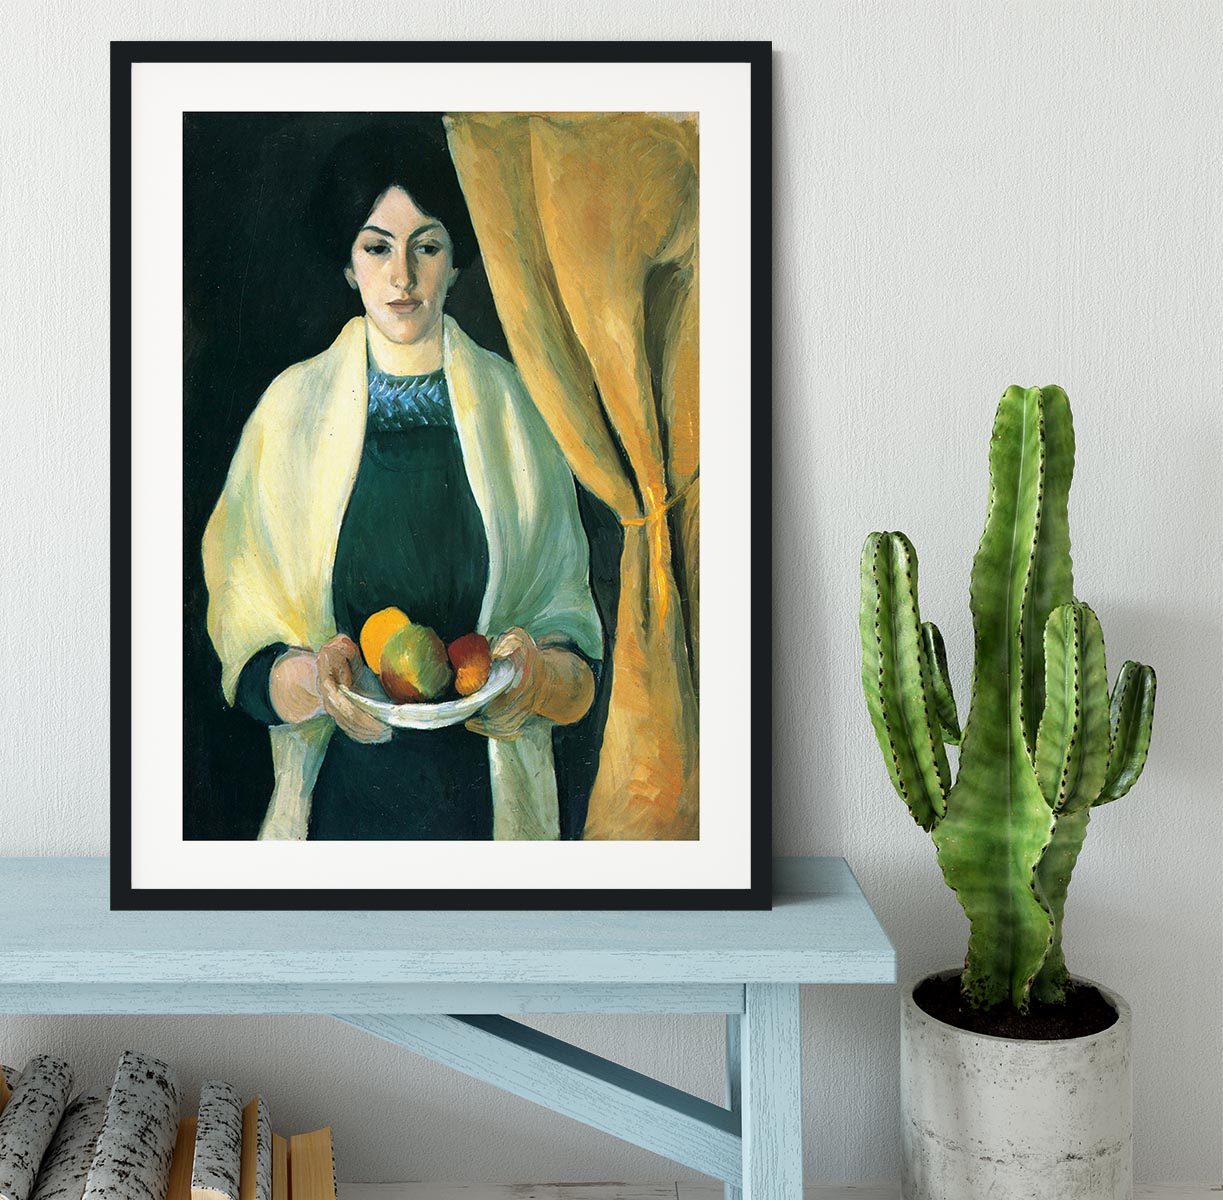 Portrait with apples portrait of the wife of the artist by Macke Framed Print - Canvas Art Rocks - 1